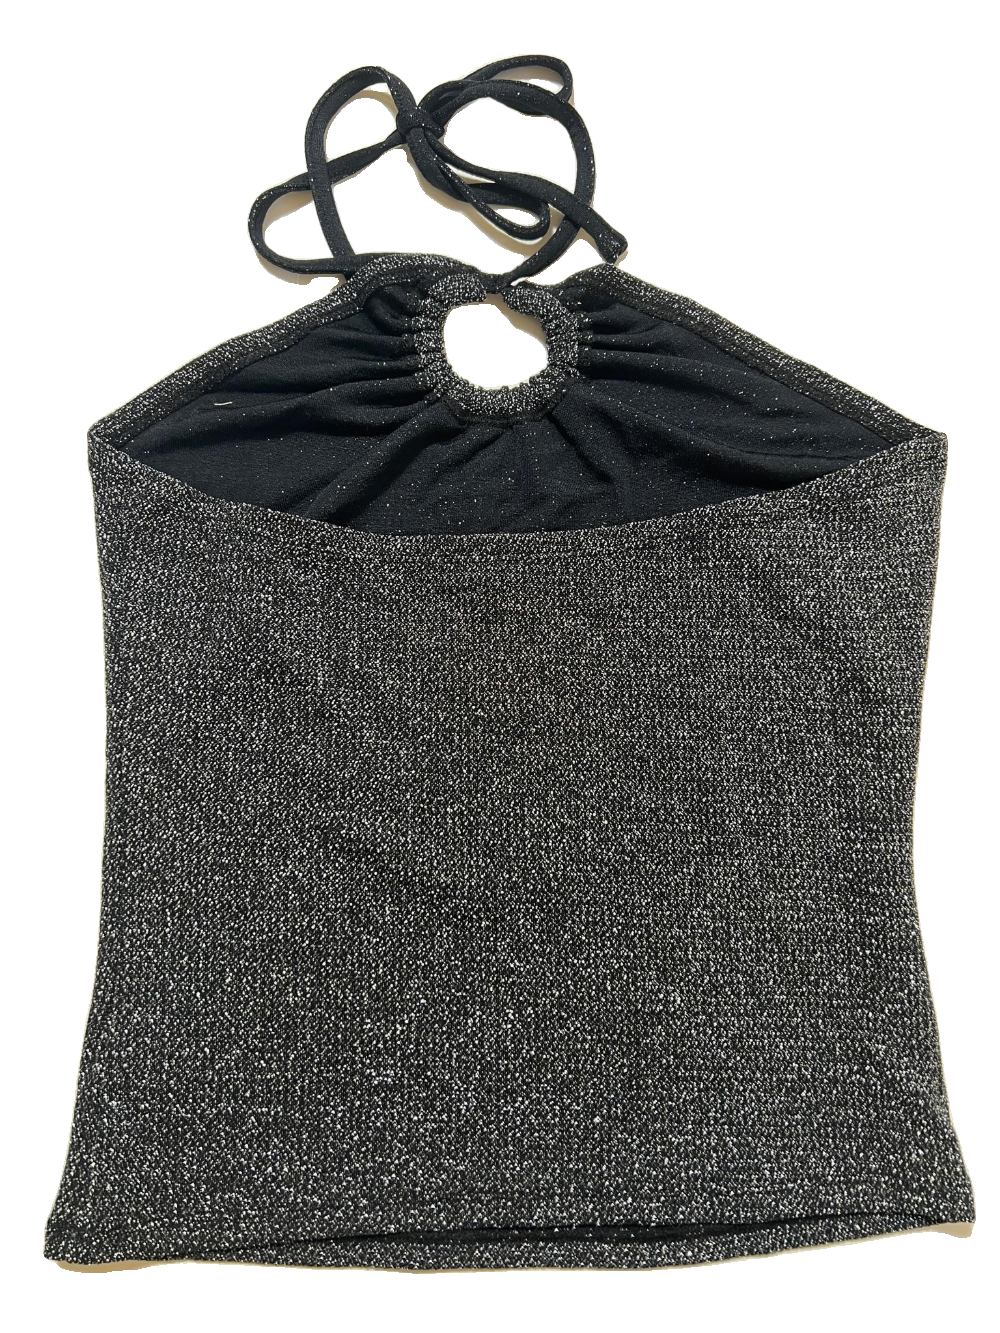 Oak+Fort- Black Halter Crop Top NEW WITH TAGS